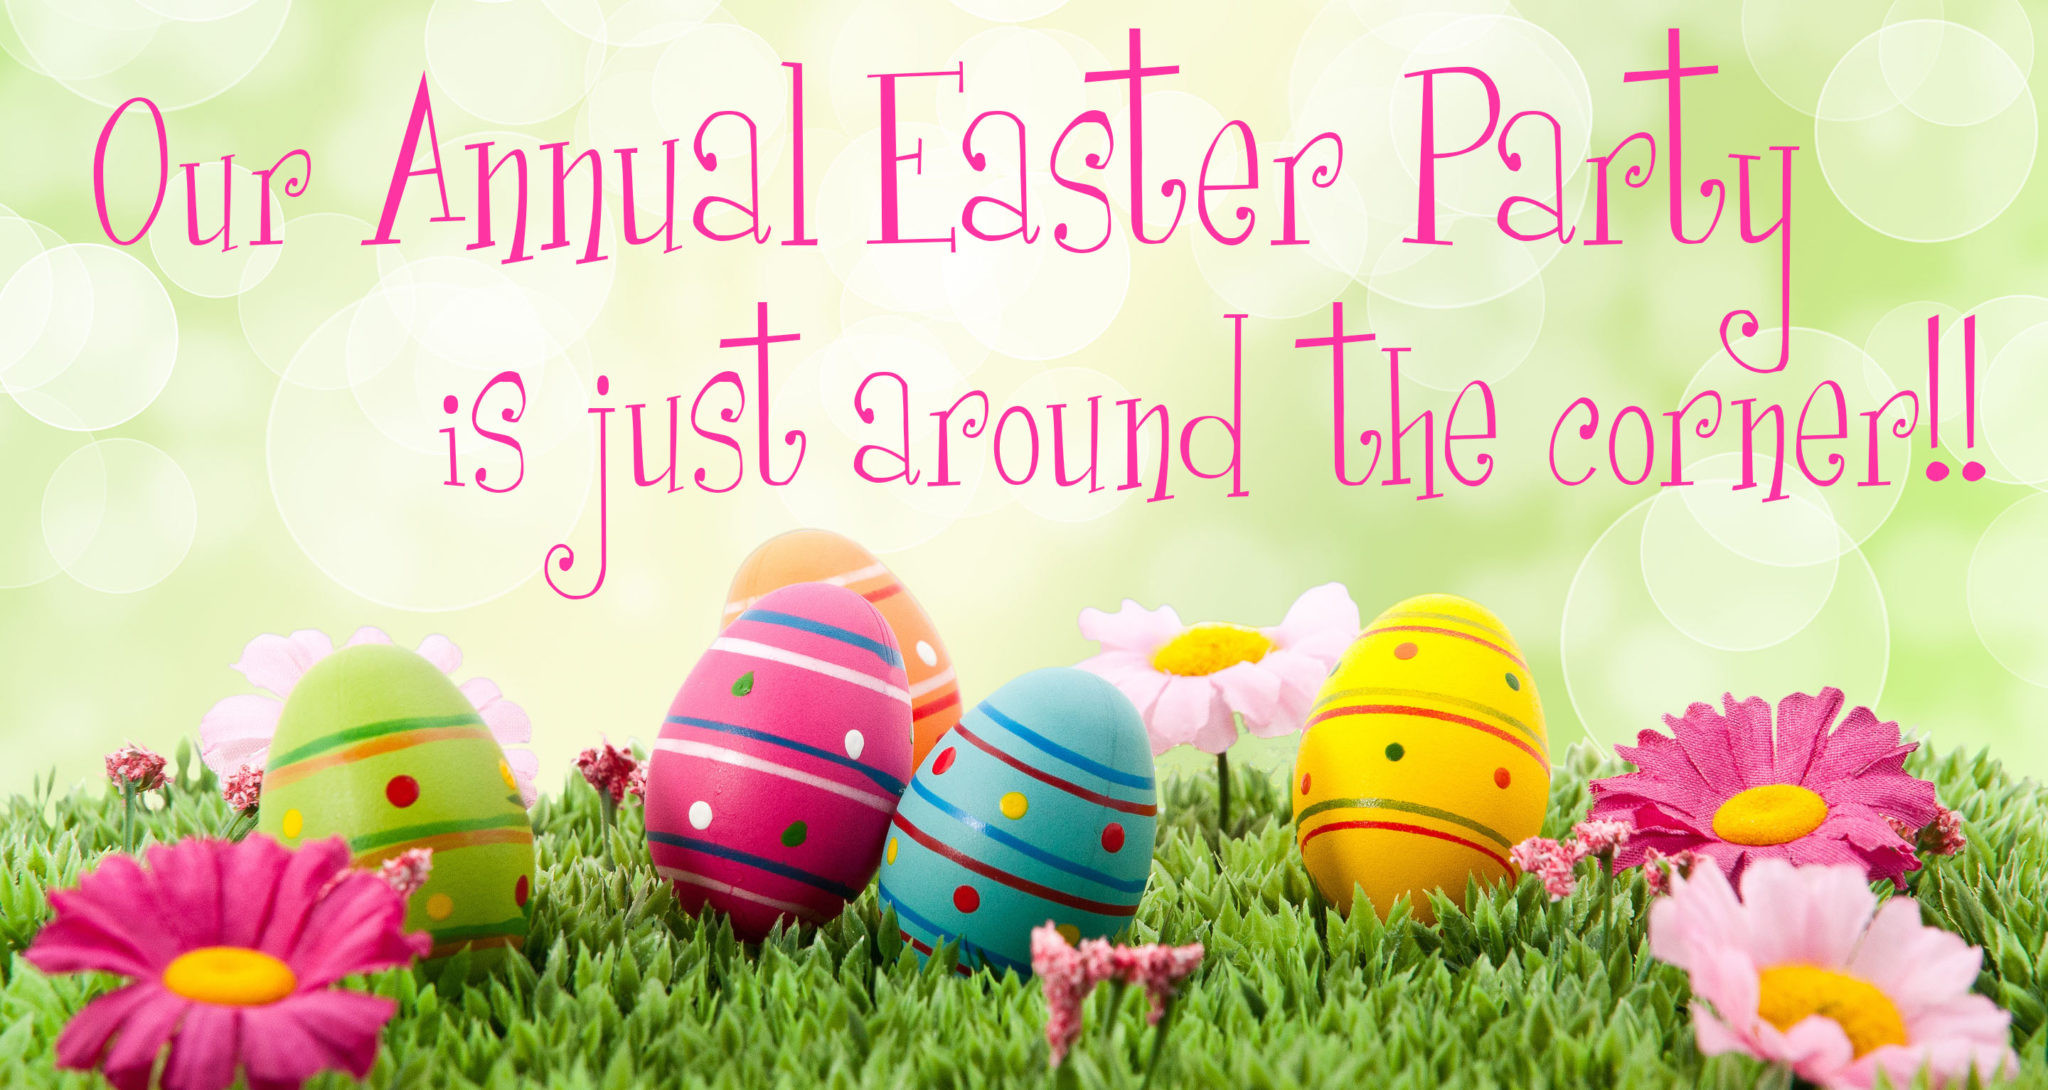 Christian Easter Party Ideas For Kids
 Easter Fundraiser Thank You Houston Children’s Charity